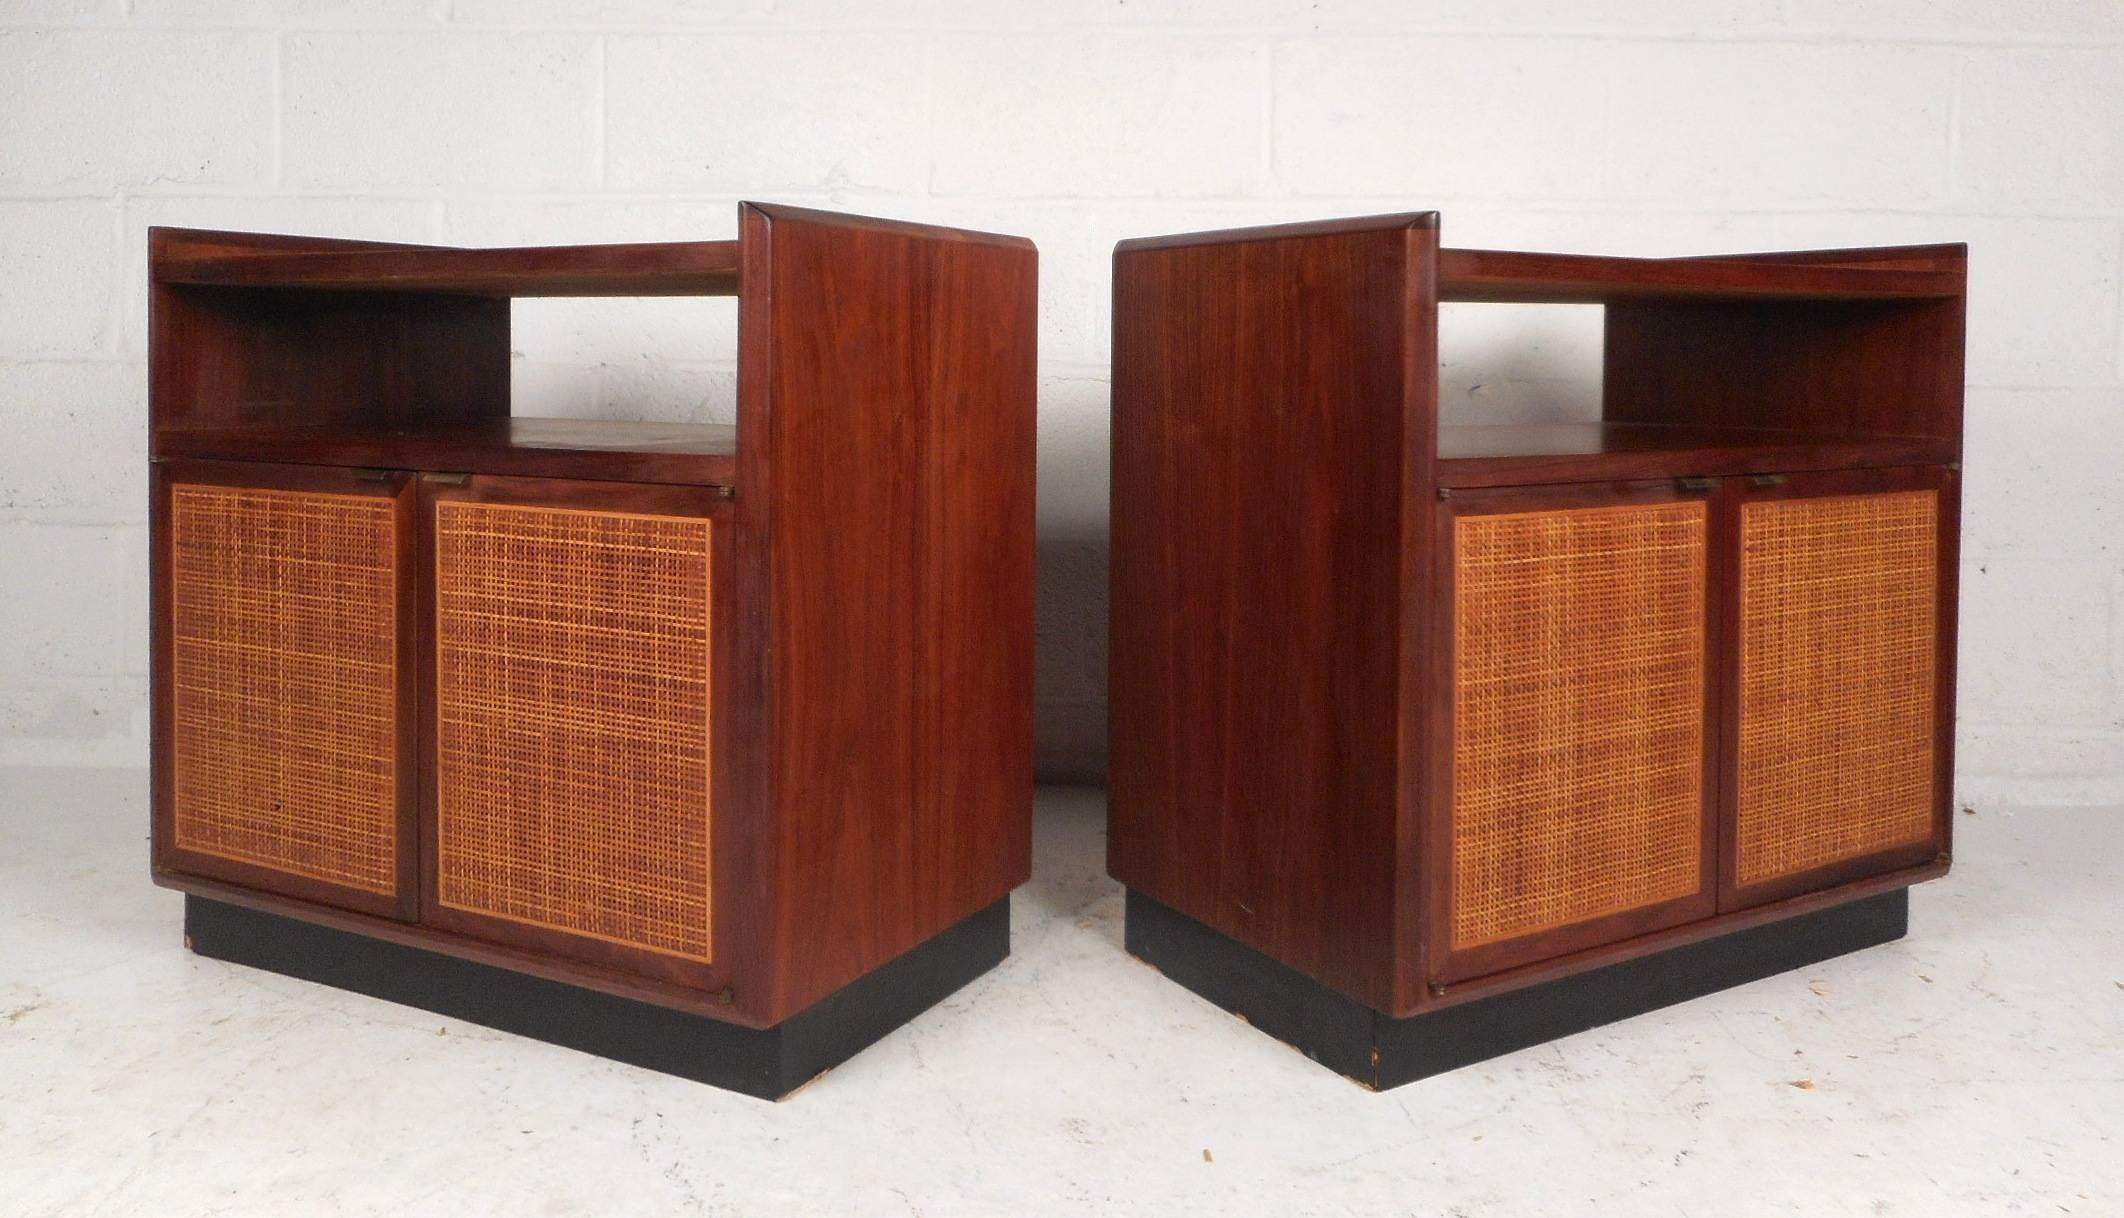 This beautiful vintage modern pair of end tables feature cane front cabinet doors that open up to unveil a large compartment for storage. Sleek design with two tiers for placing items, sculpted brass cabinet pulls, and a black painted base. Elegant